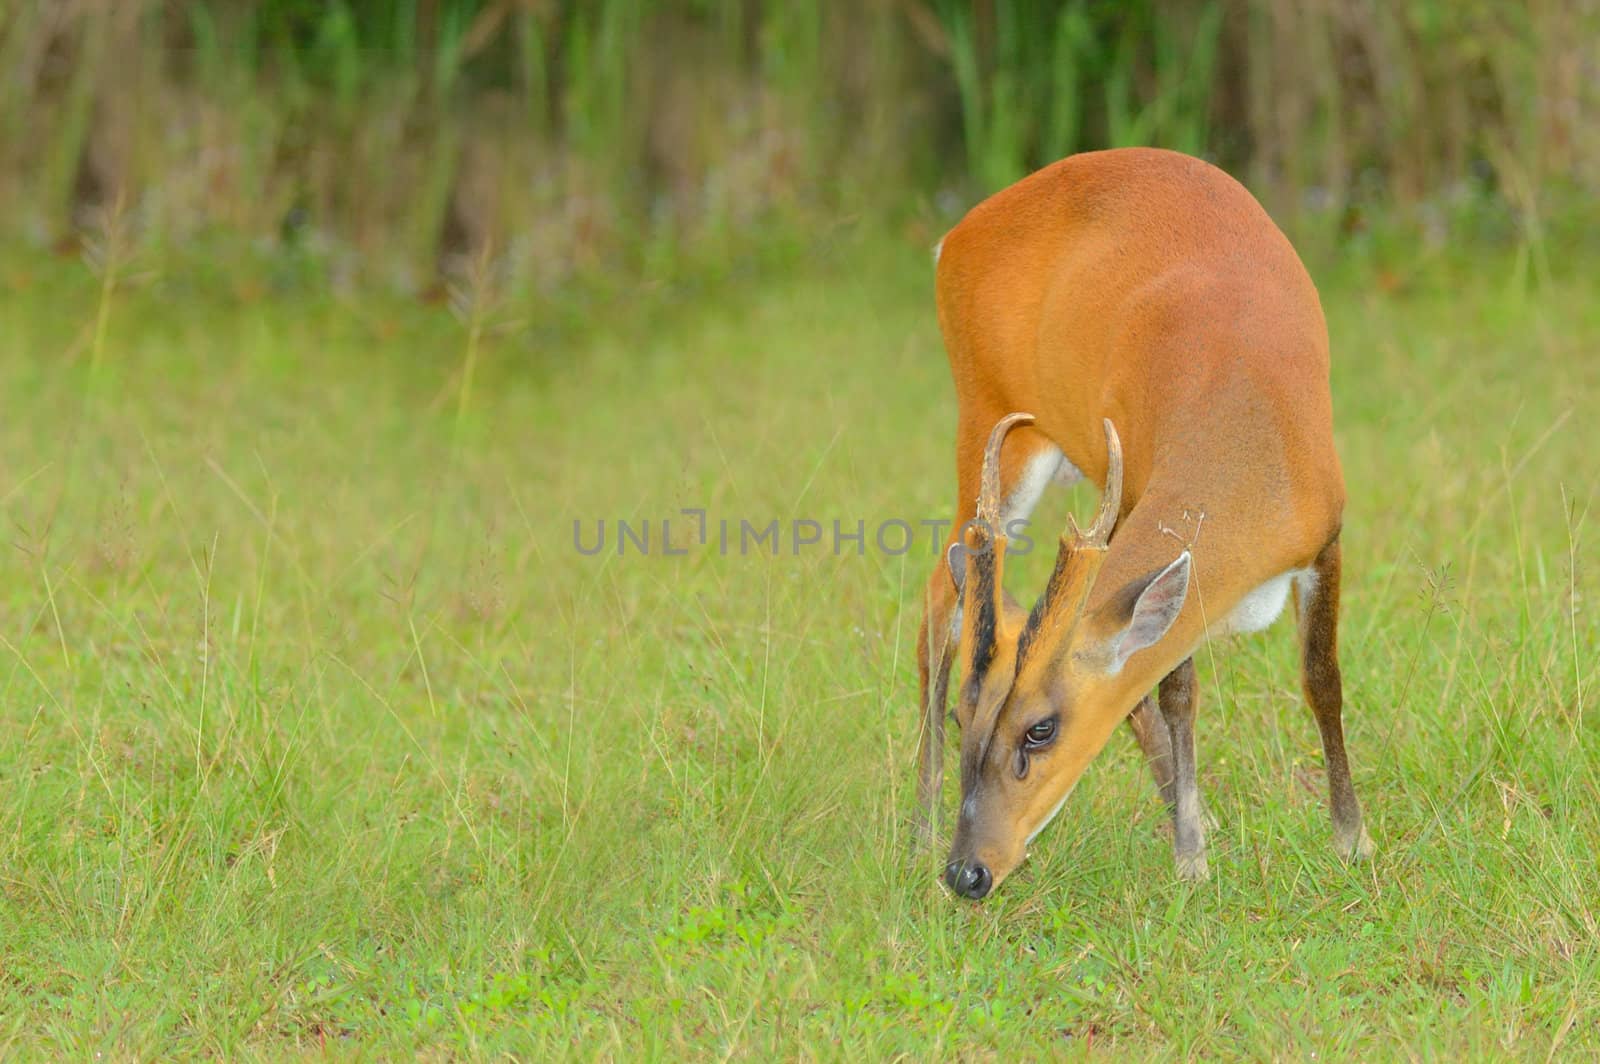 The little deer nibble grass in national park, Thailand.